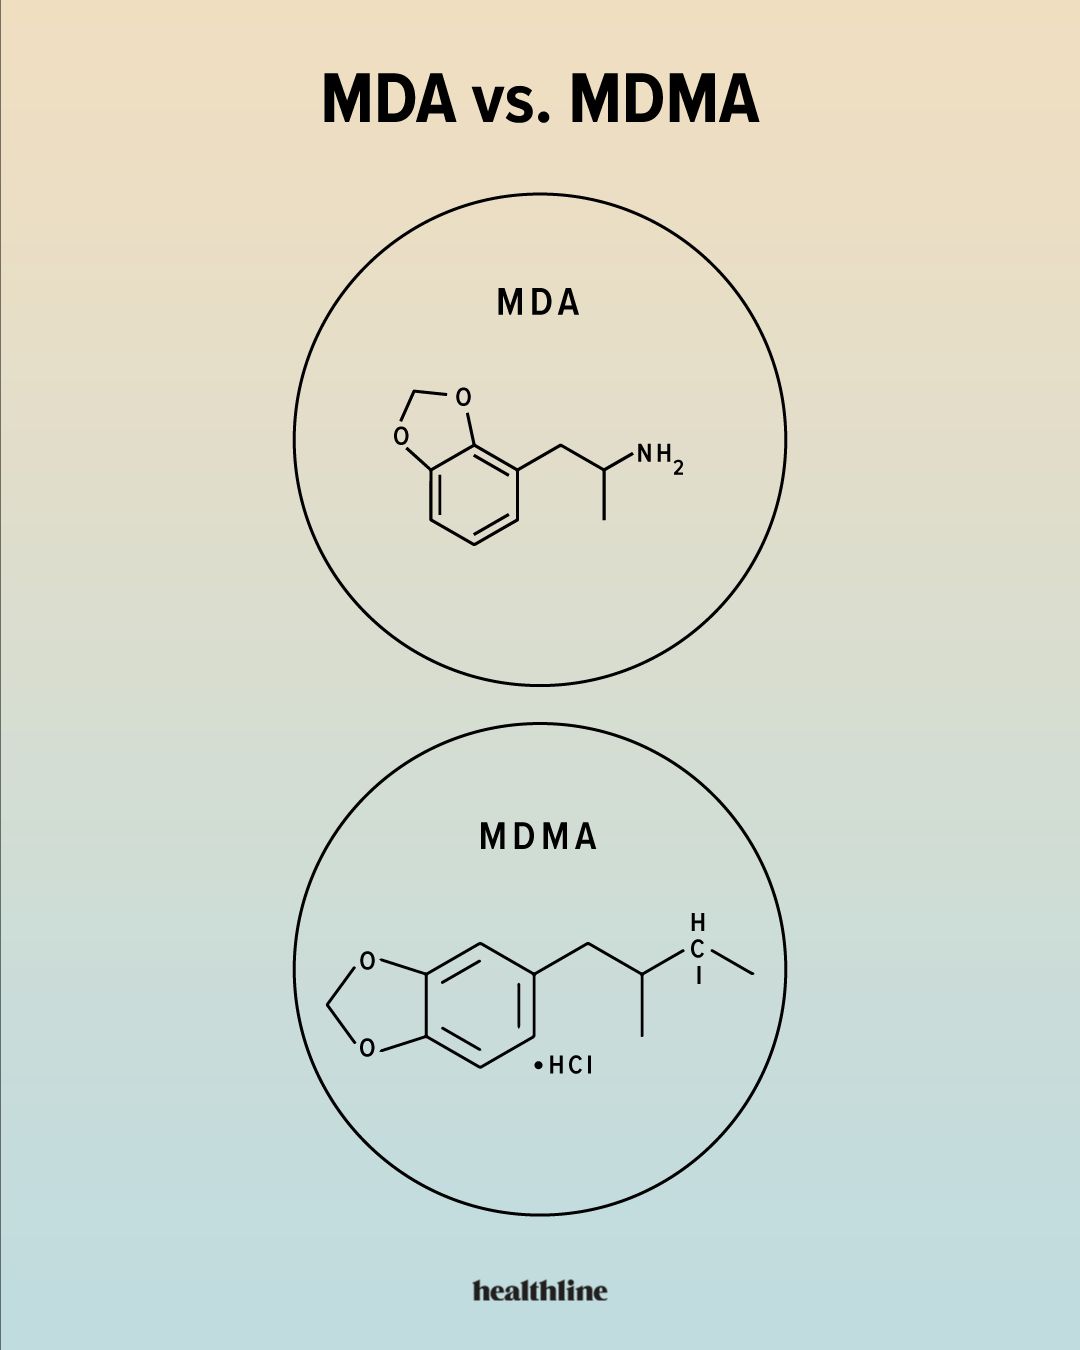 An illustration of the chemical structures of MDA and MDMA.